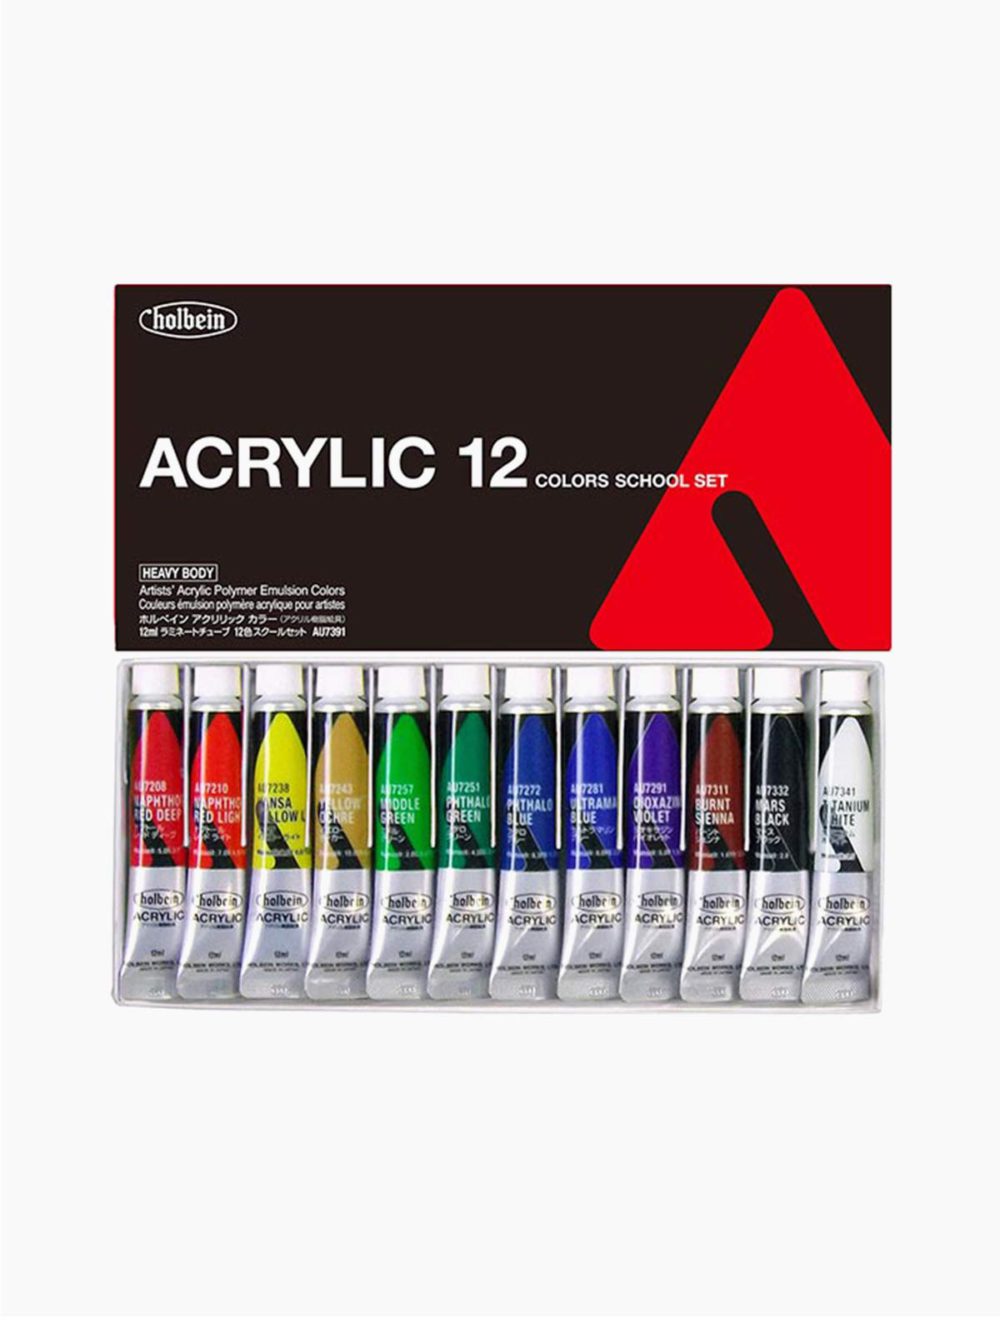 Holbein Acrylic Heavy Body Colors School Set of 12 Colors (12ml)